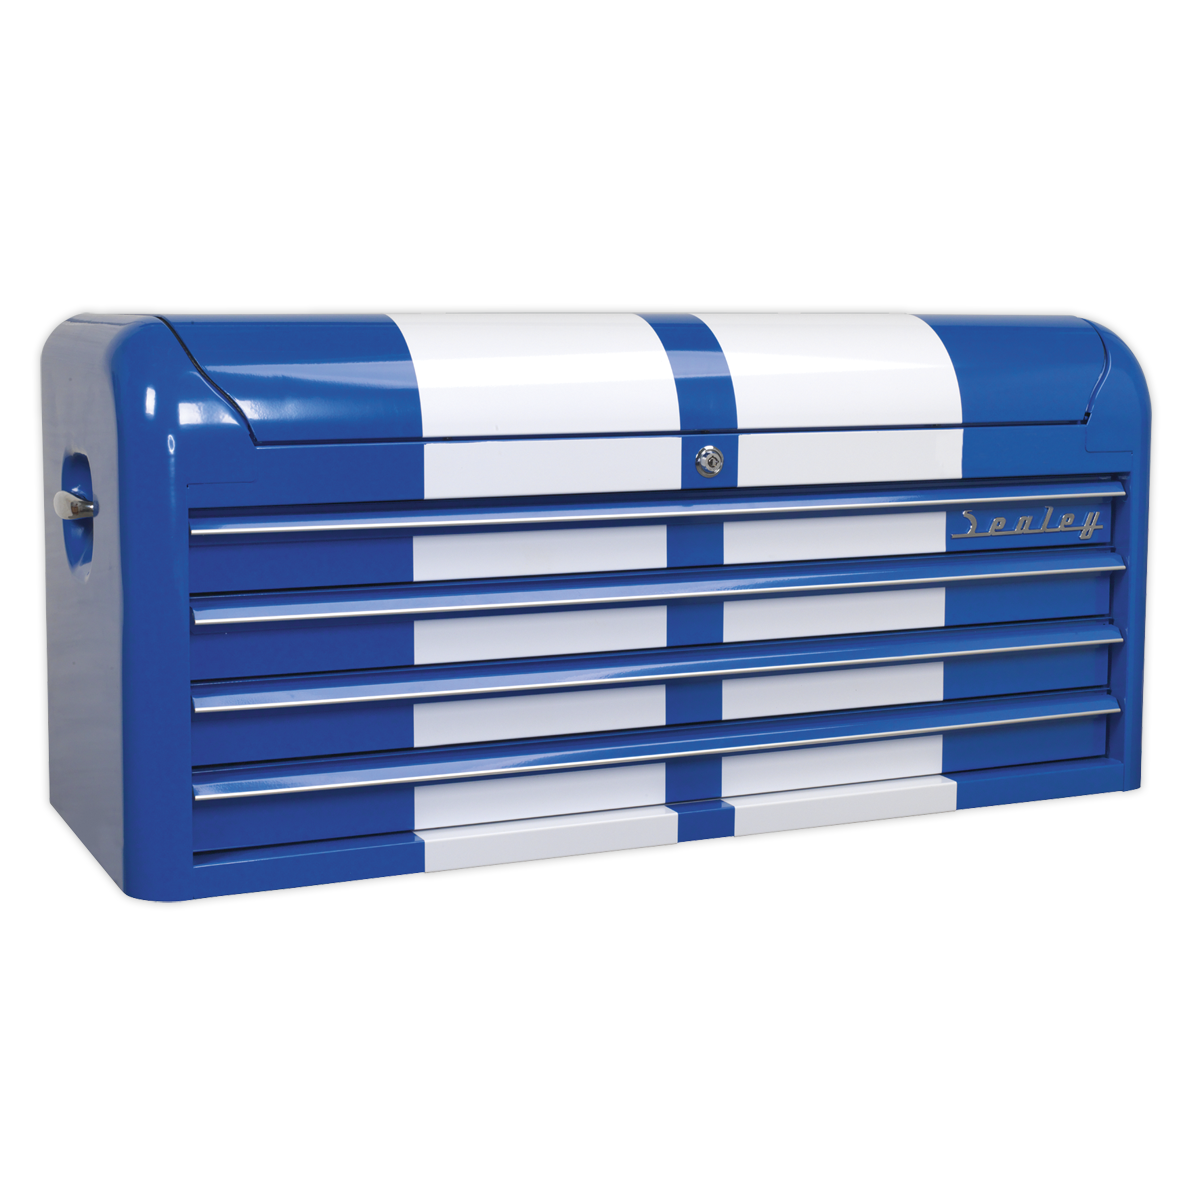 Sealey premier  tool storage top chest